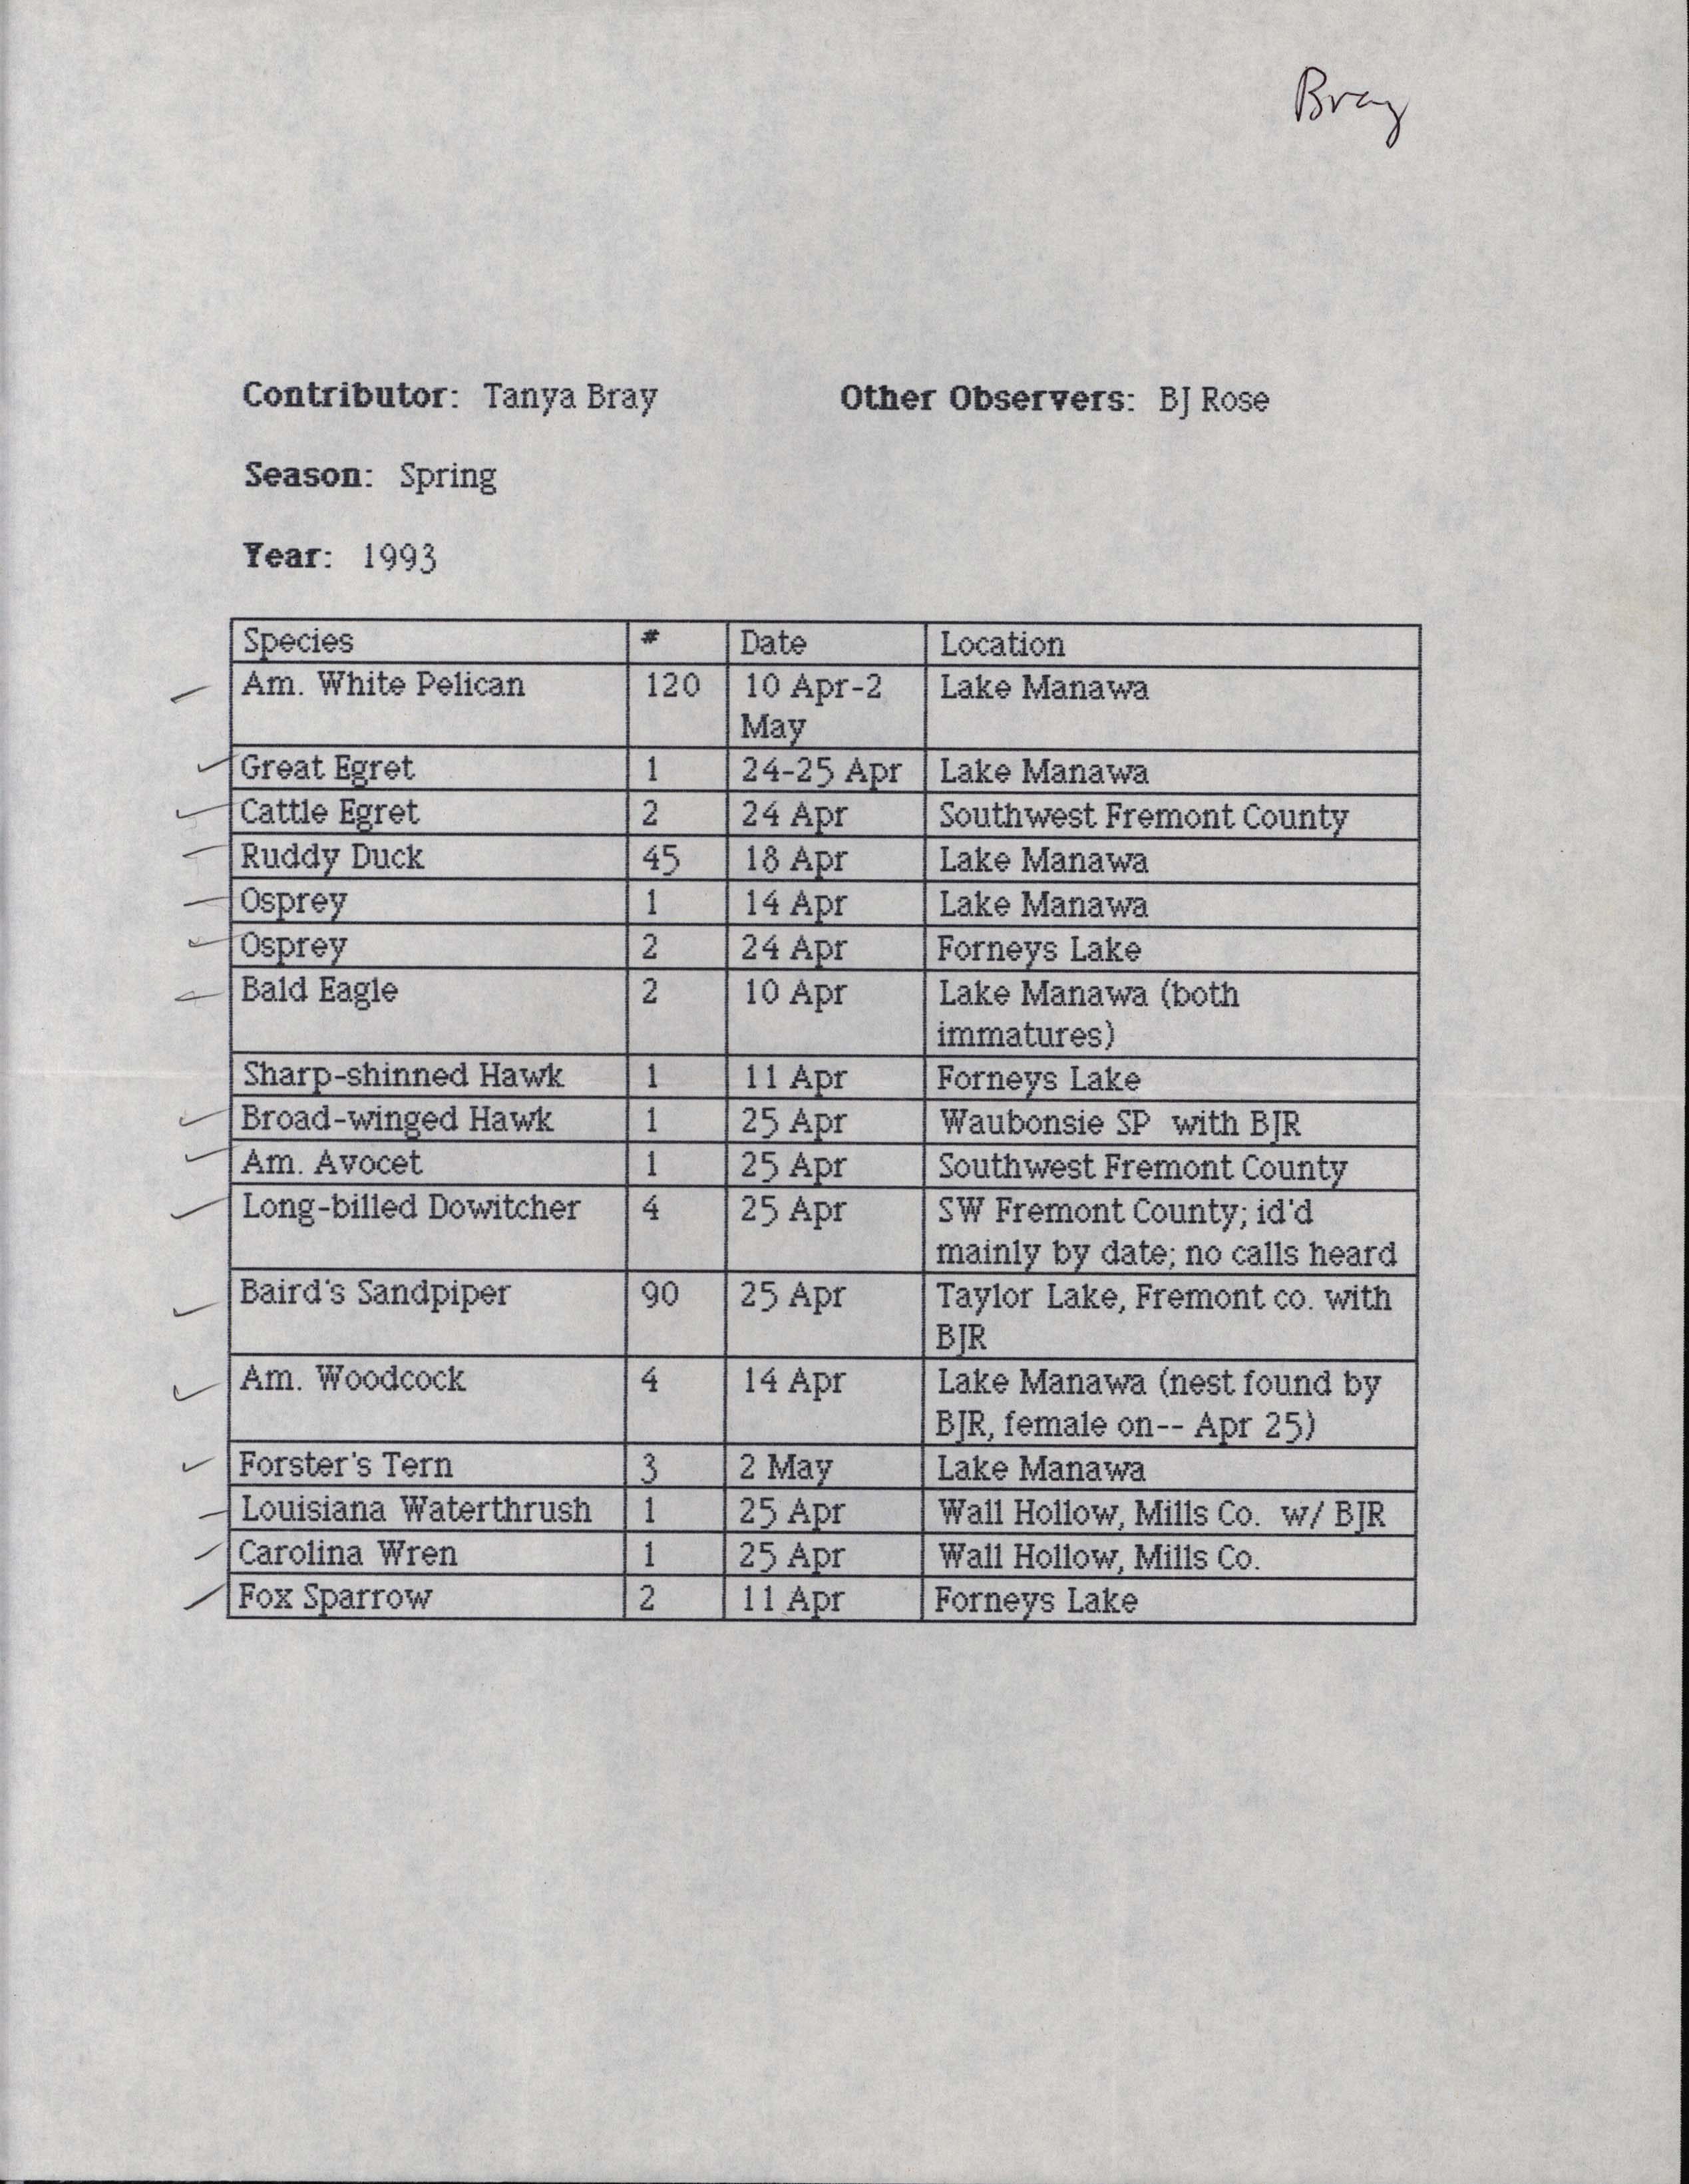 Annotated bird sighting list for Spring 1993 compiled by Tanya Bray